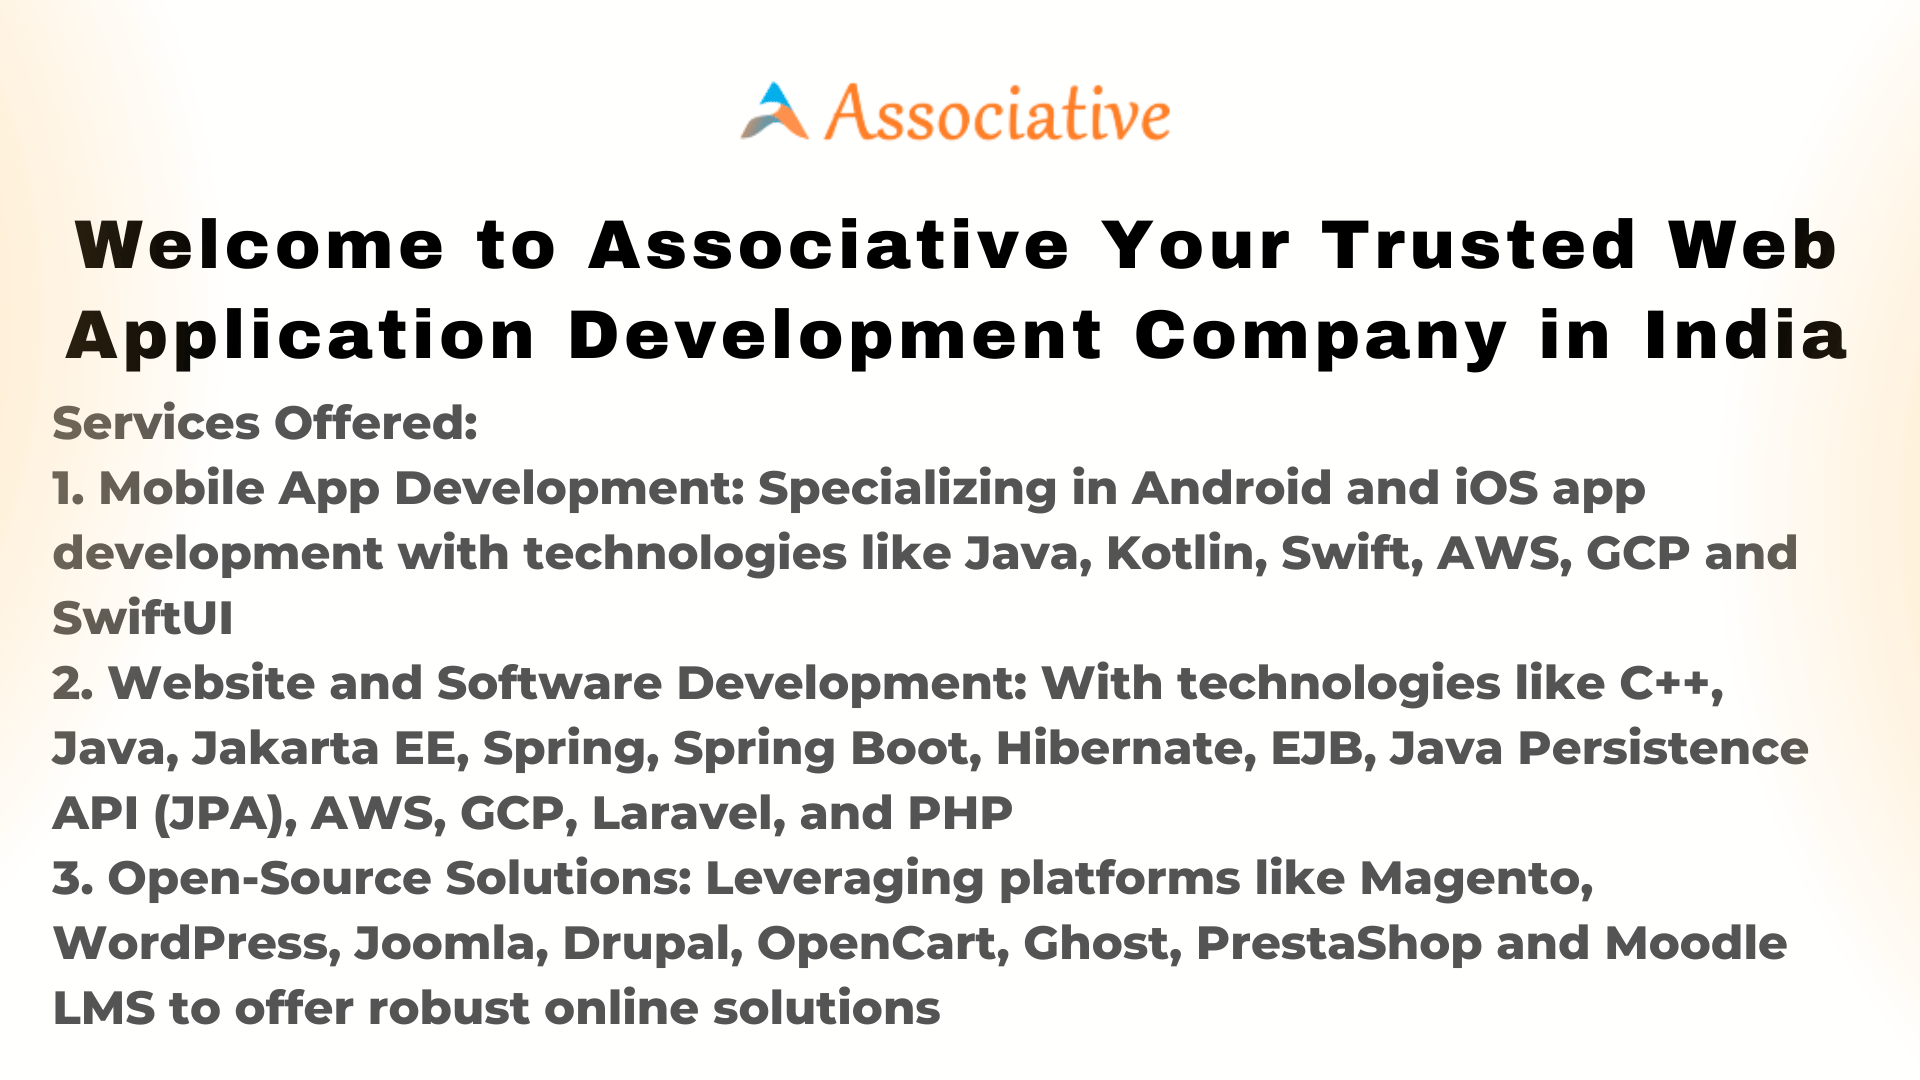 Welcome to Associative Your Trusted Web Application Development Company in India